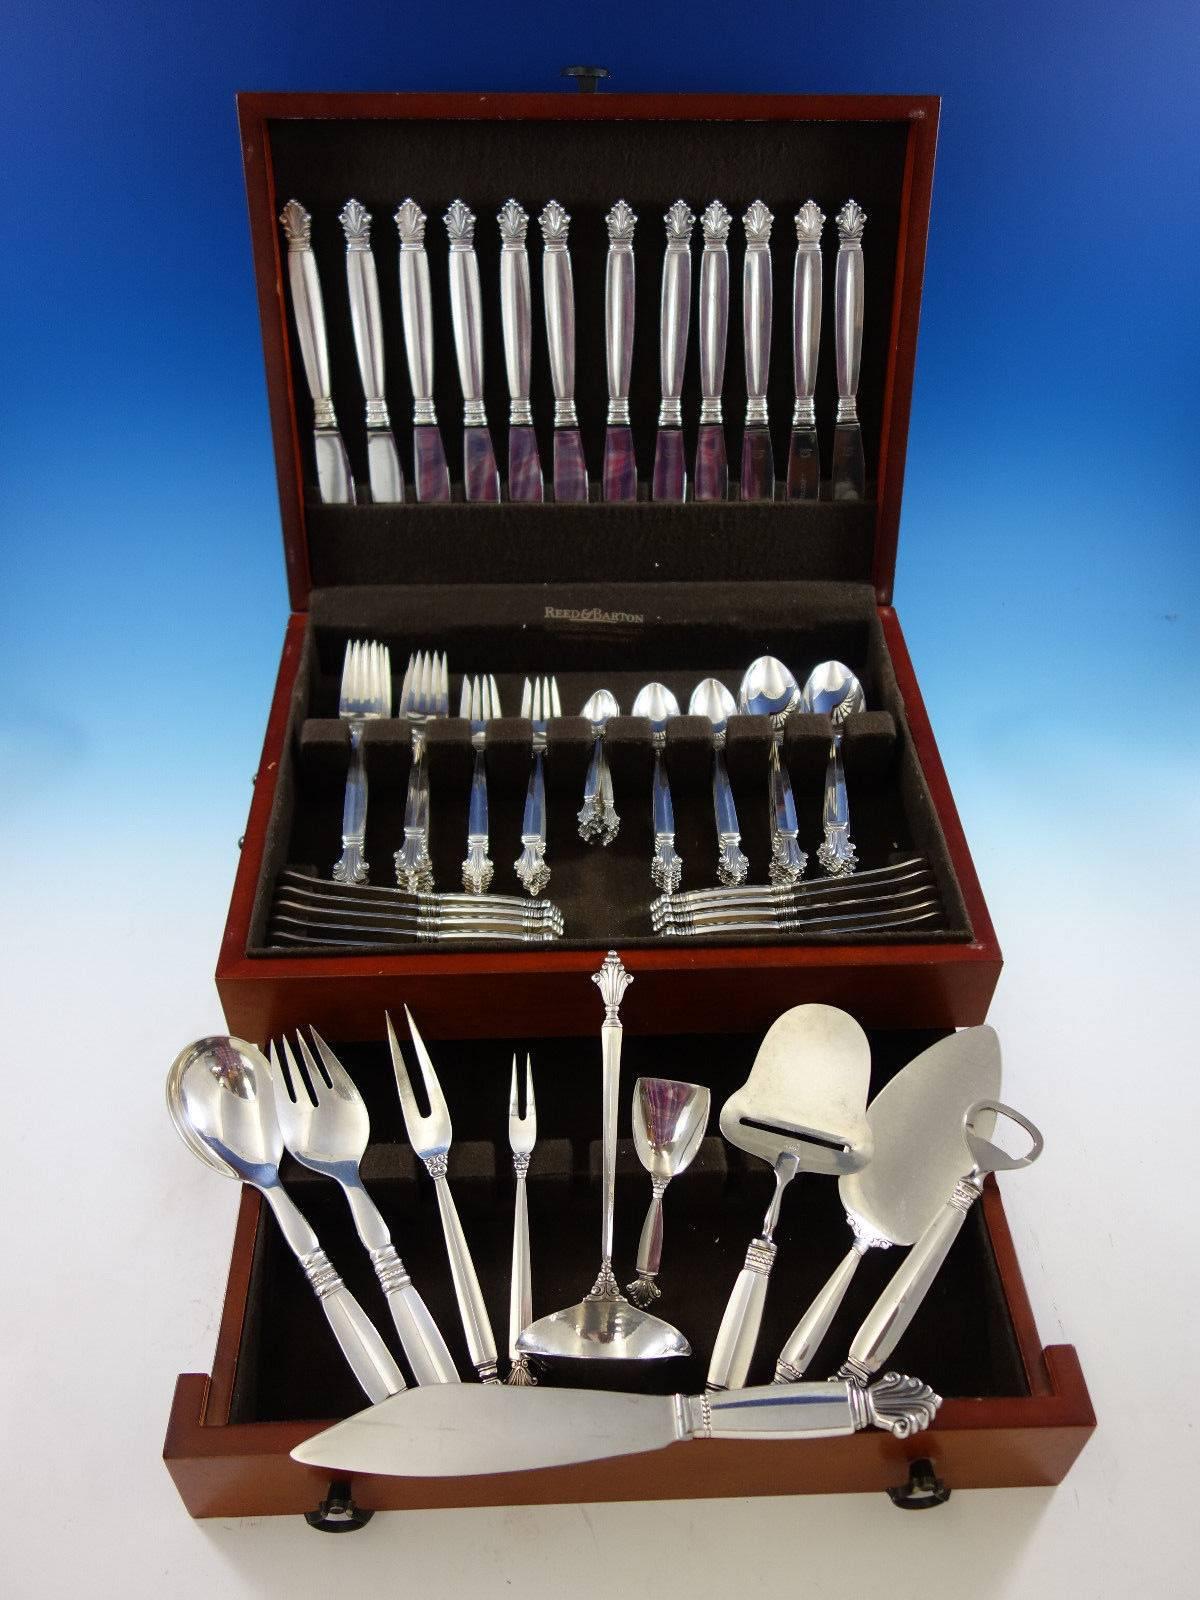 Acanthus by Georg Jensen sterling silver dinner size flatware set - 94 pieces. This set includes:

12 dinner knives, long handle, 9